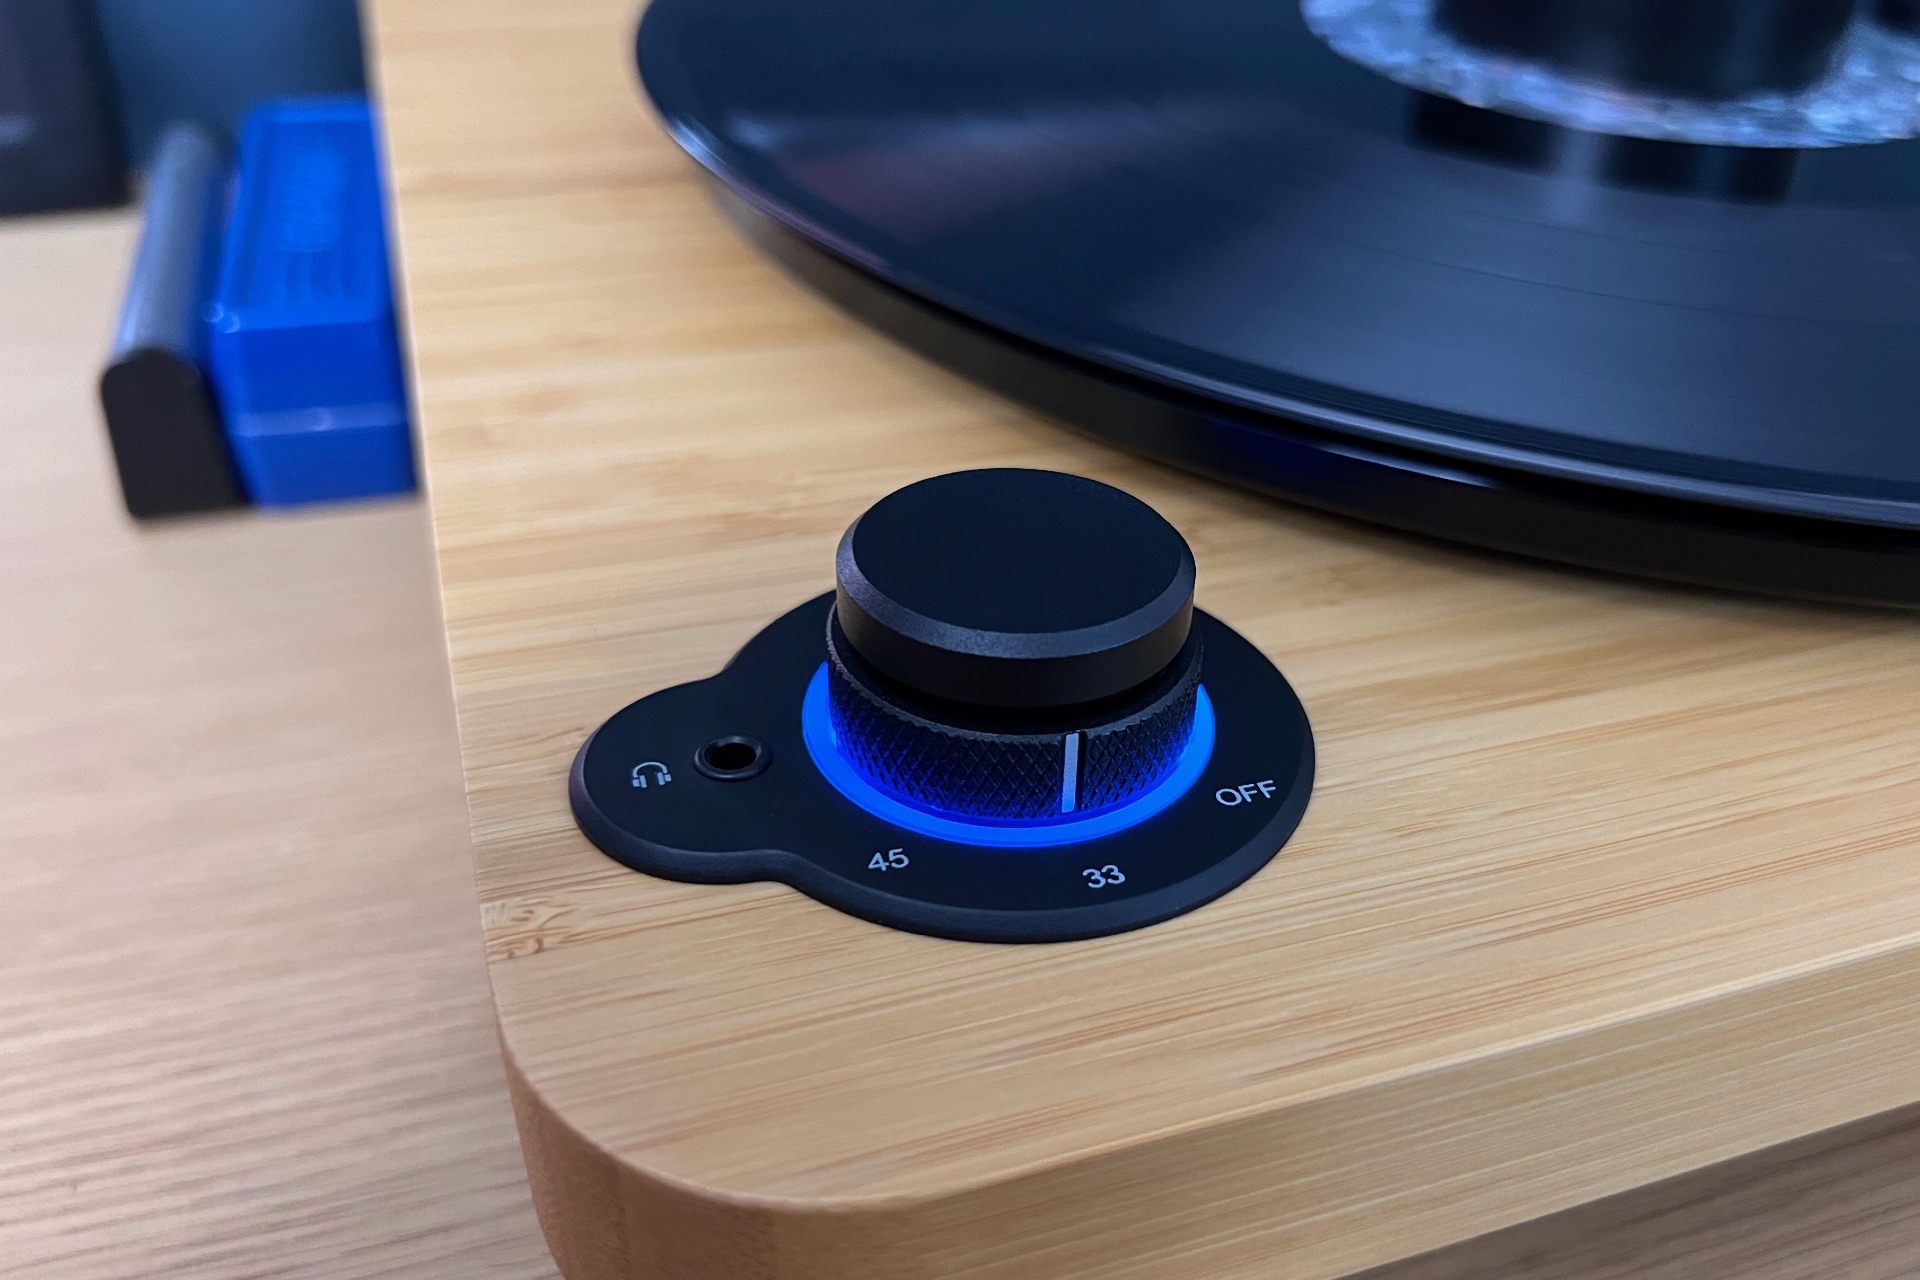 House of Marley Stir it Up Lux turntable review: Let the music shine